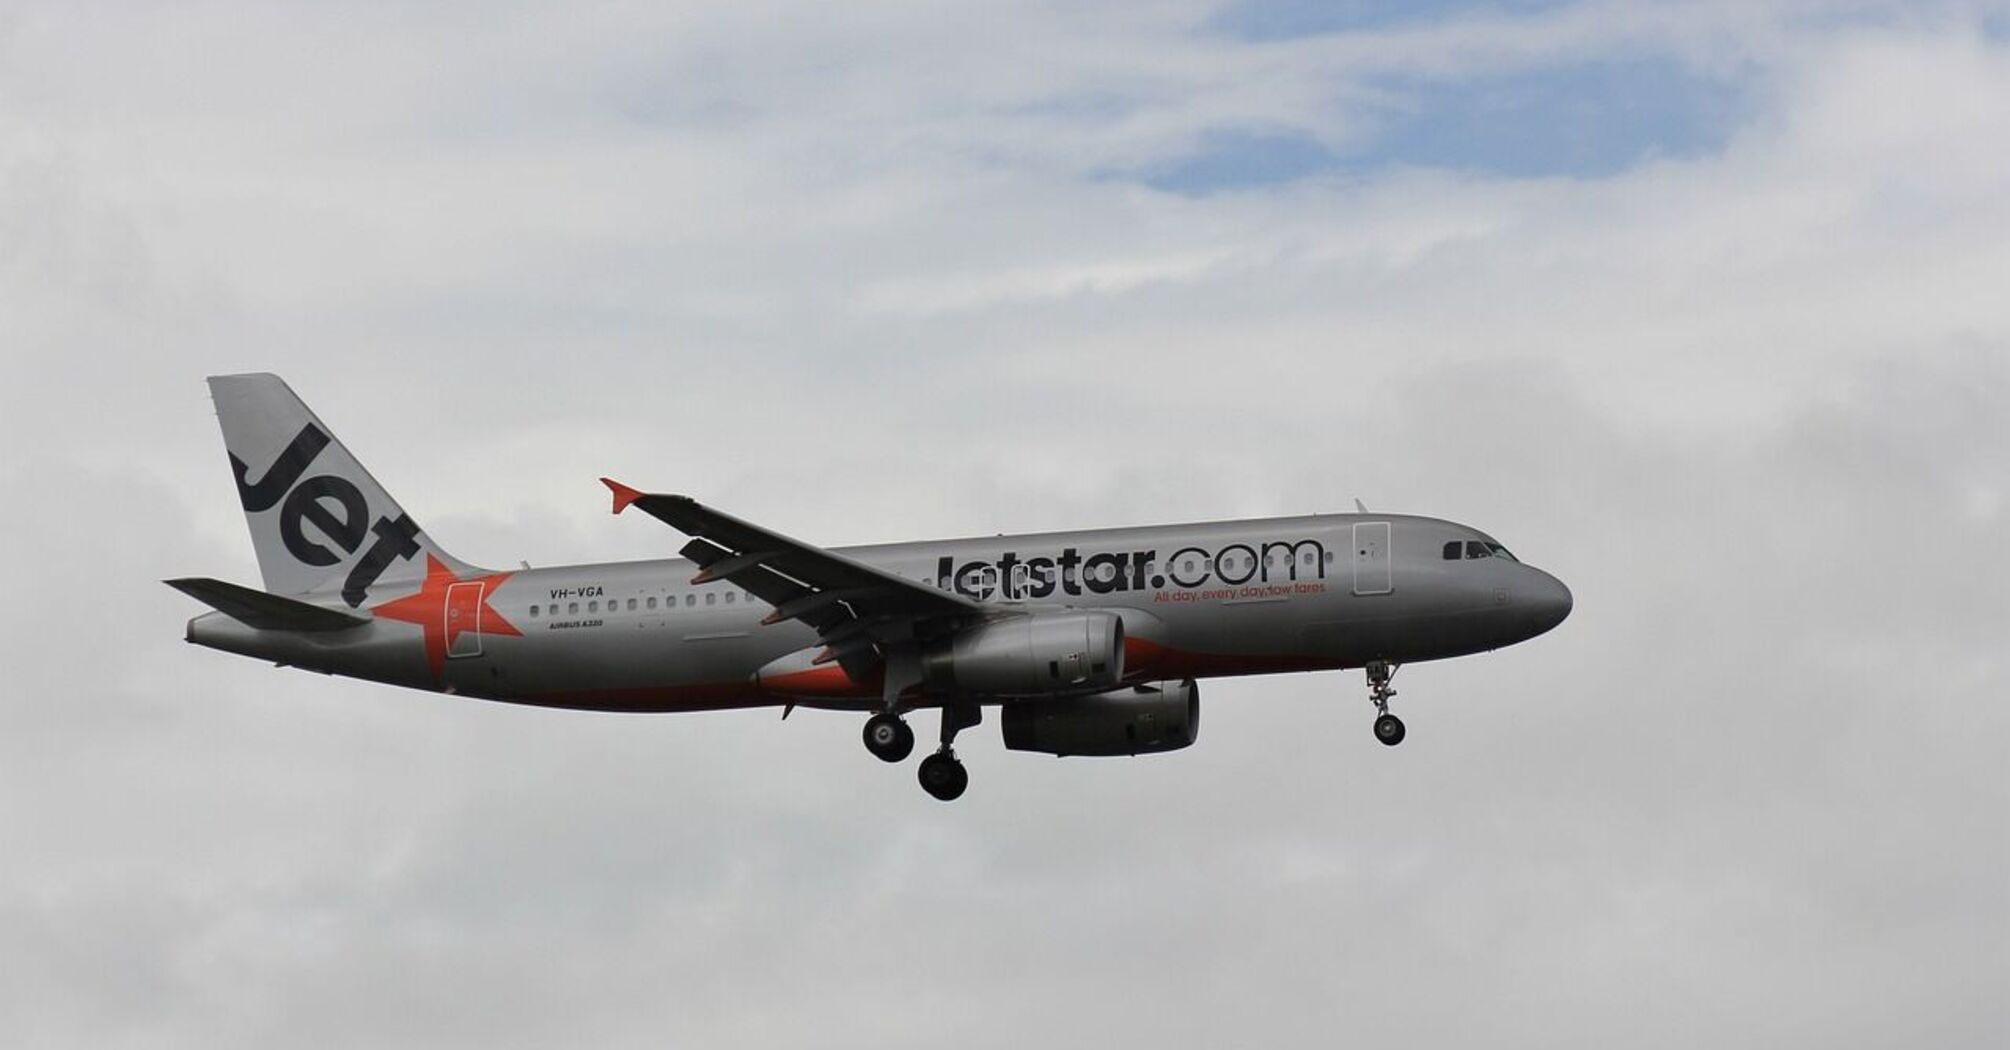 A Jetstar passenger complained that a flight attendant refused to provide him with a complimentary use of her pen